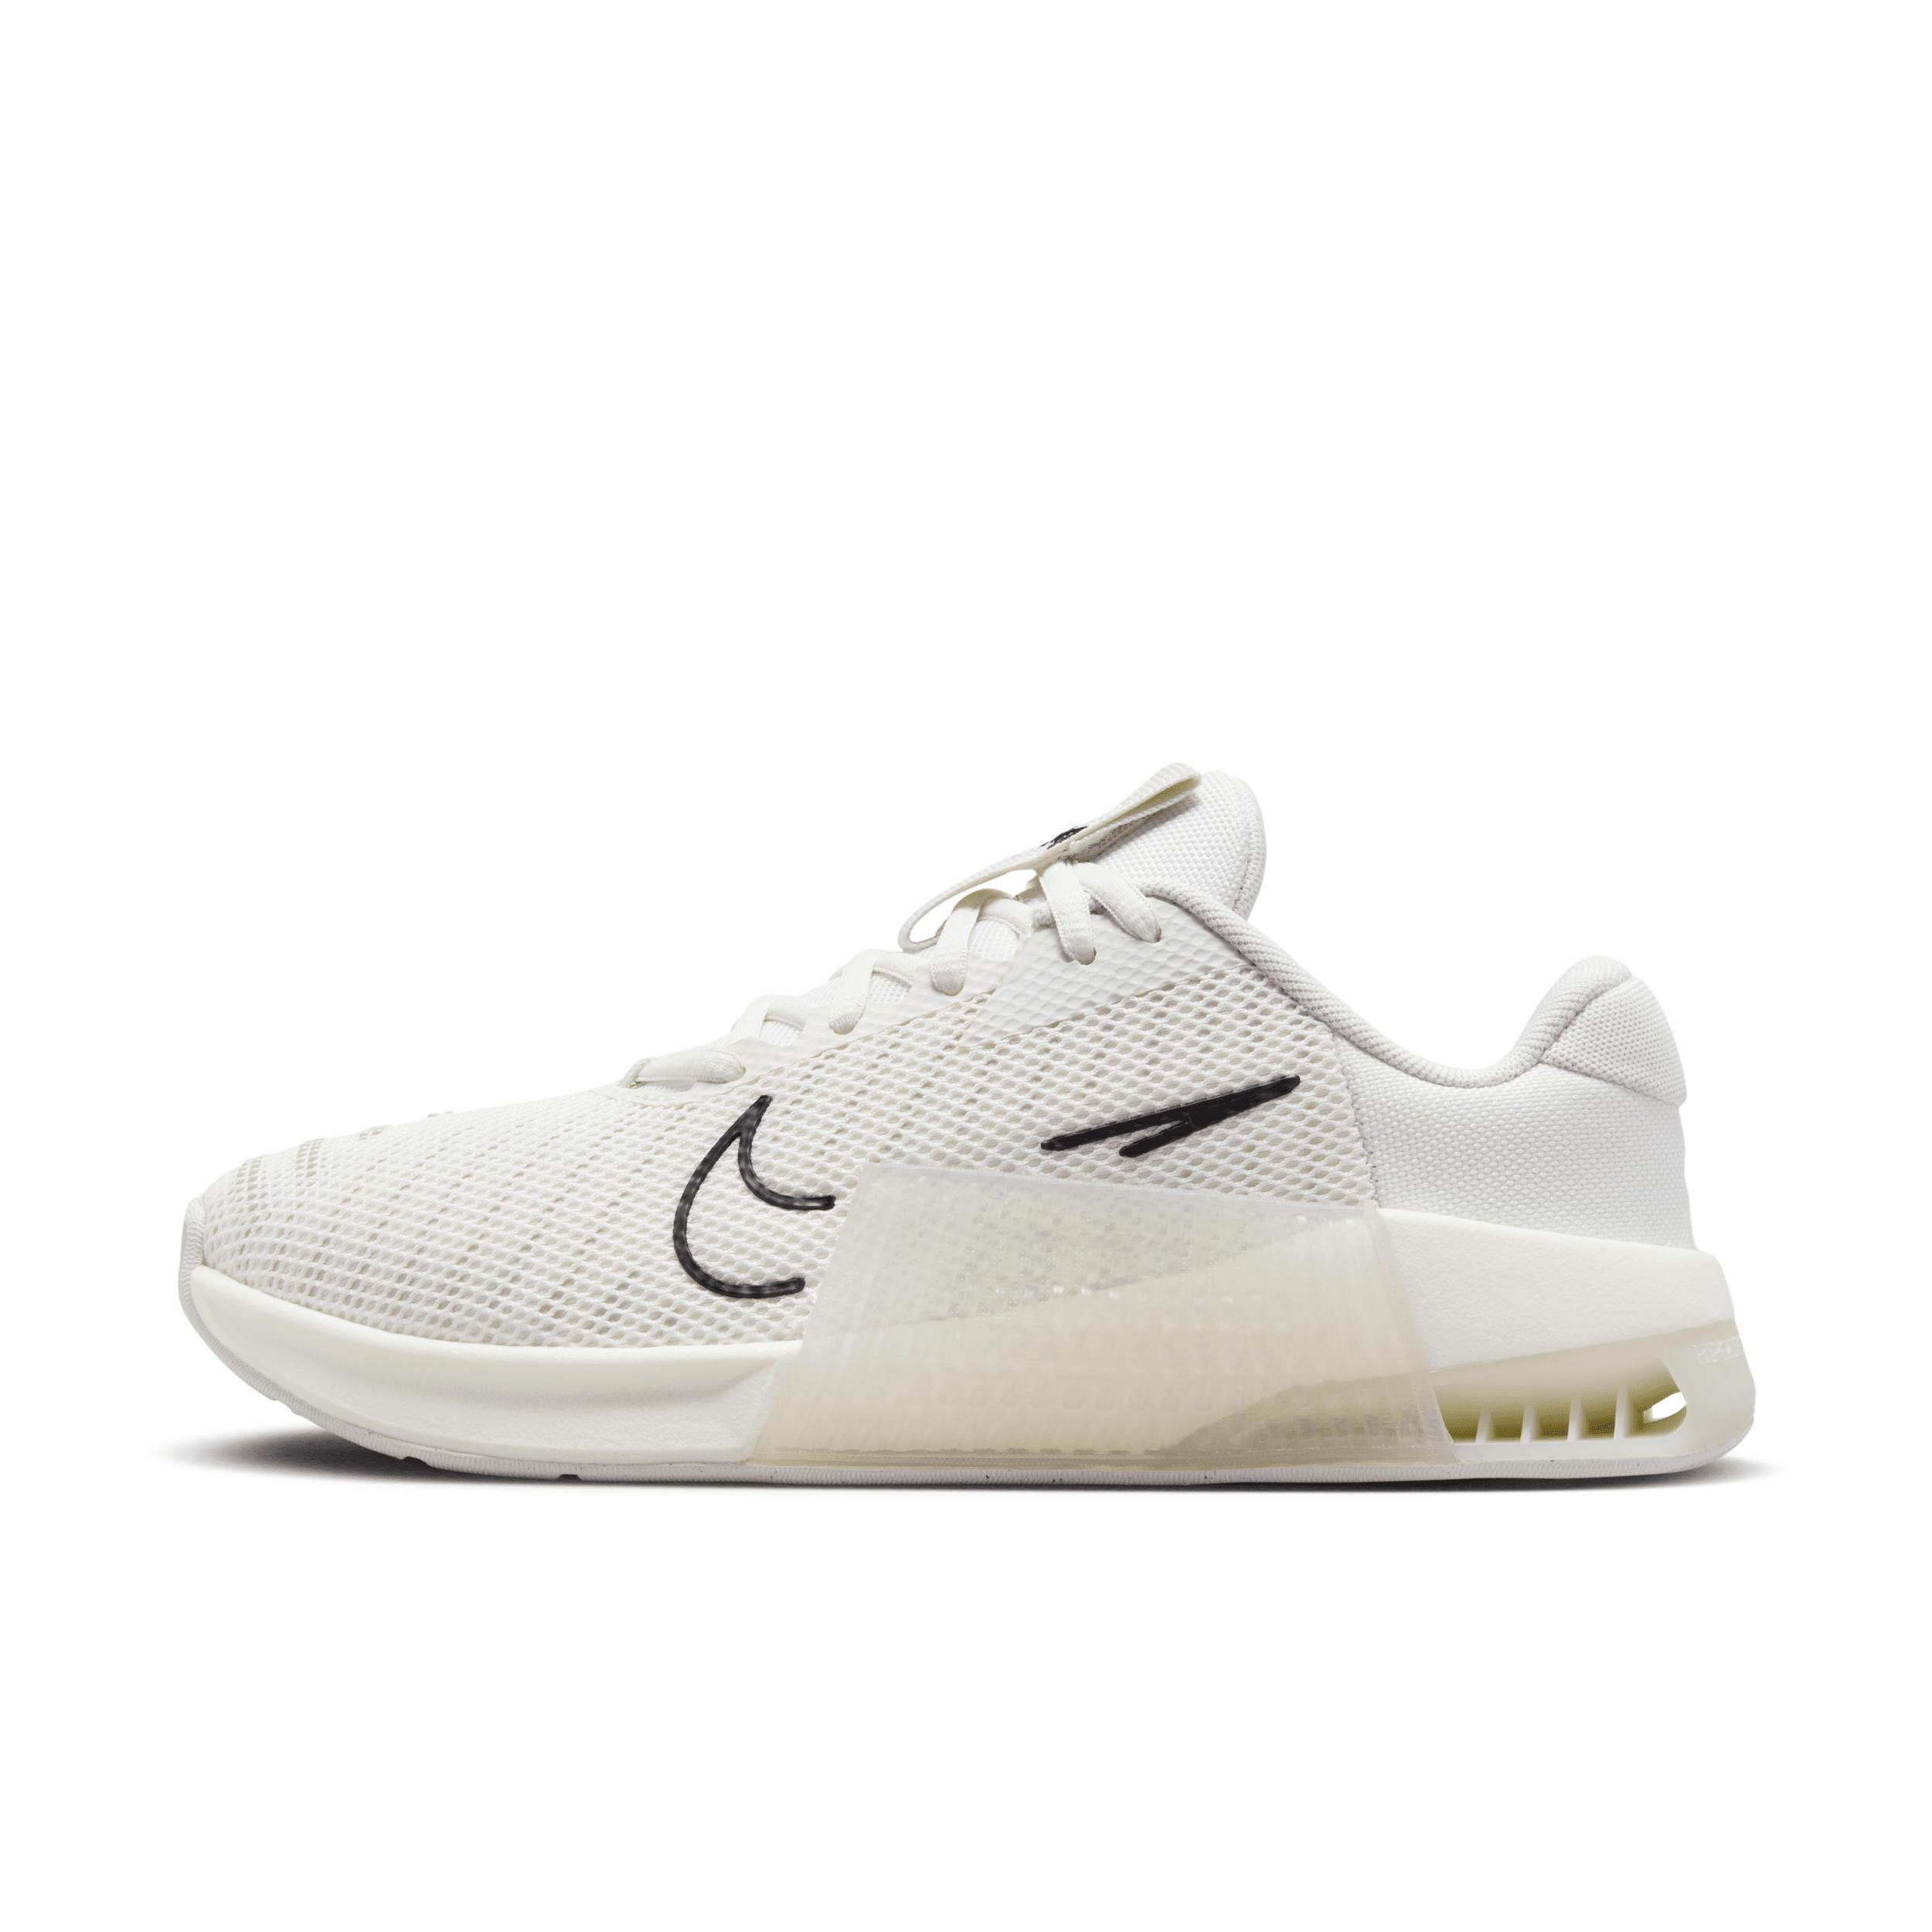 Nike Metcon 9 Amp Workout Shoes in White | Lyst